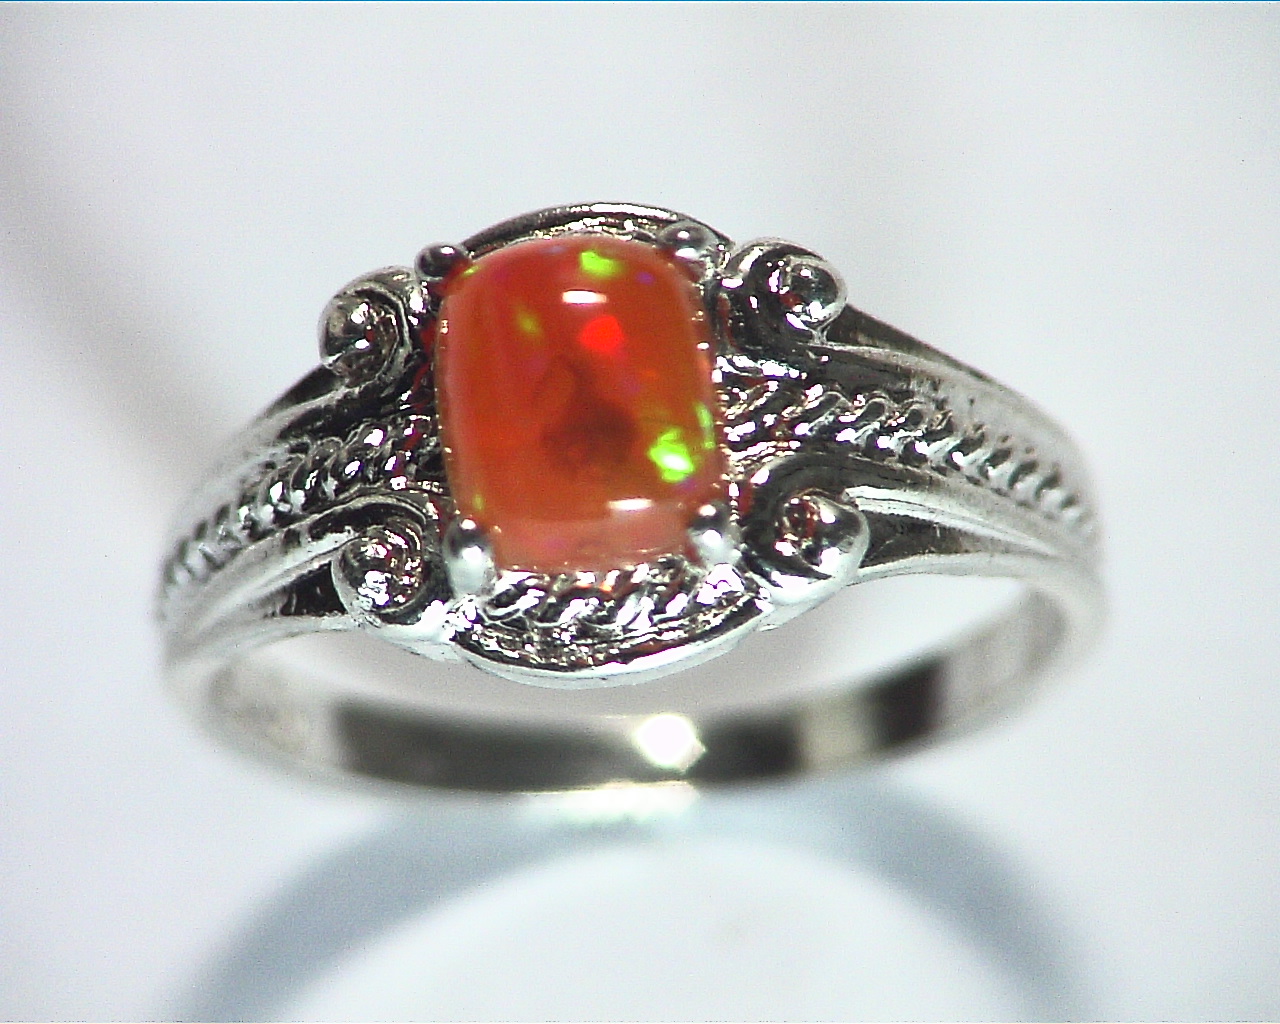 Opal (Mexican) Genuine Gemstone in Sterling Silver Ring RSS,602 1